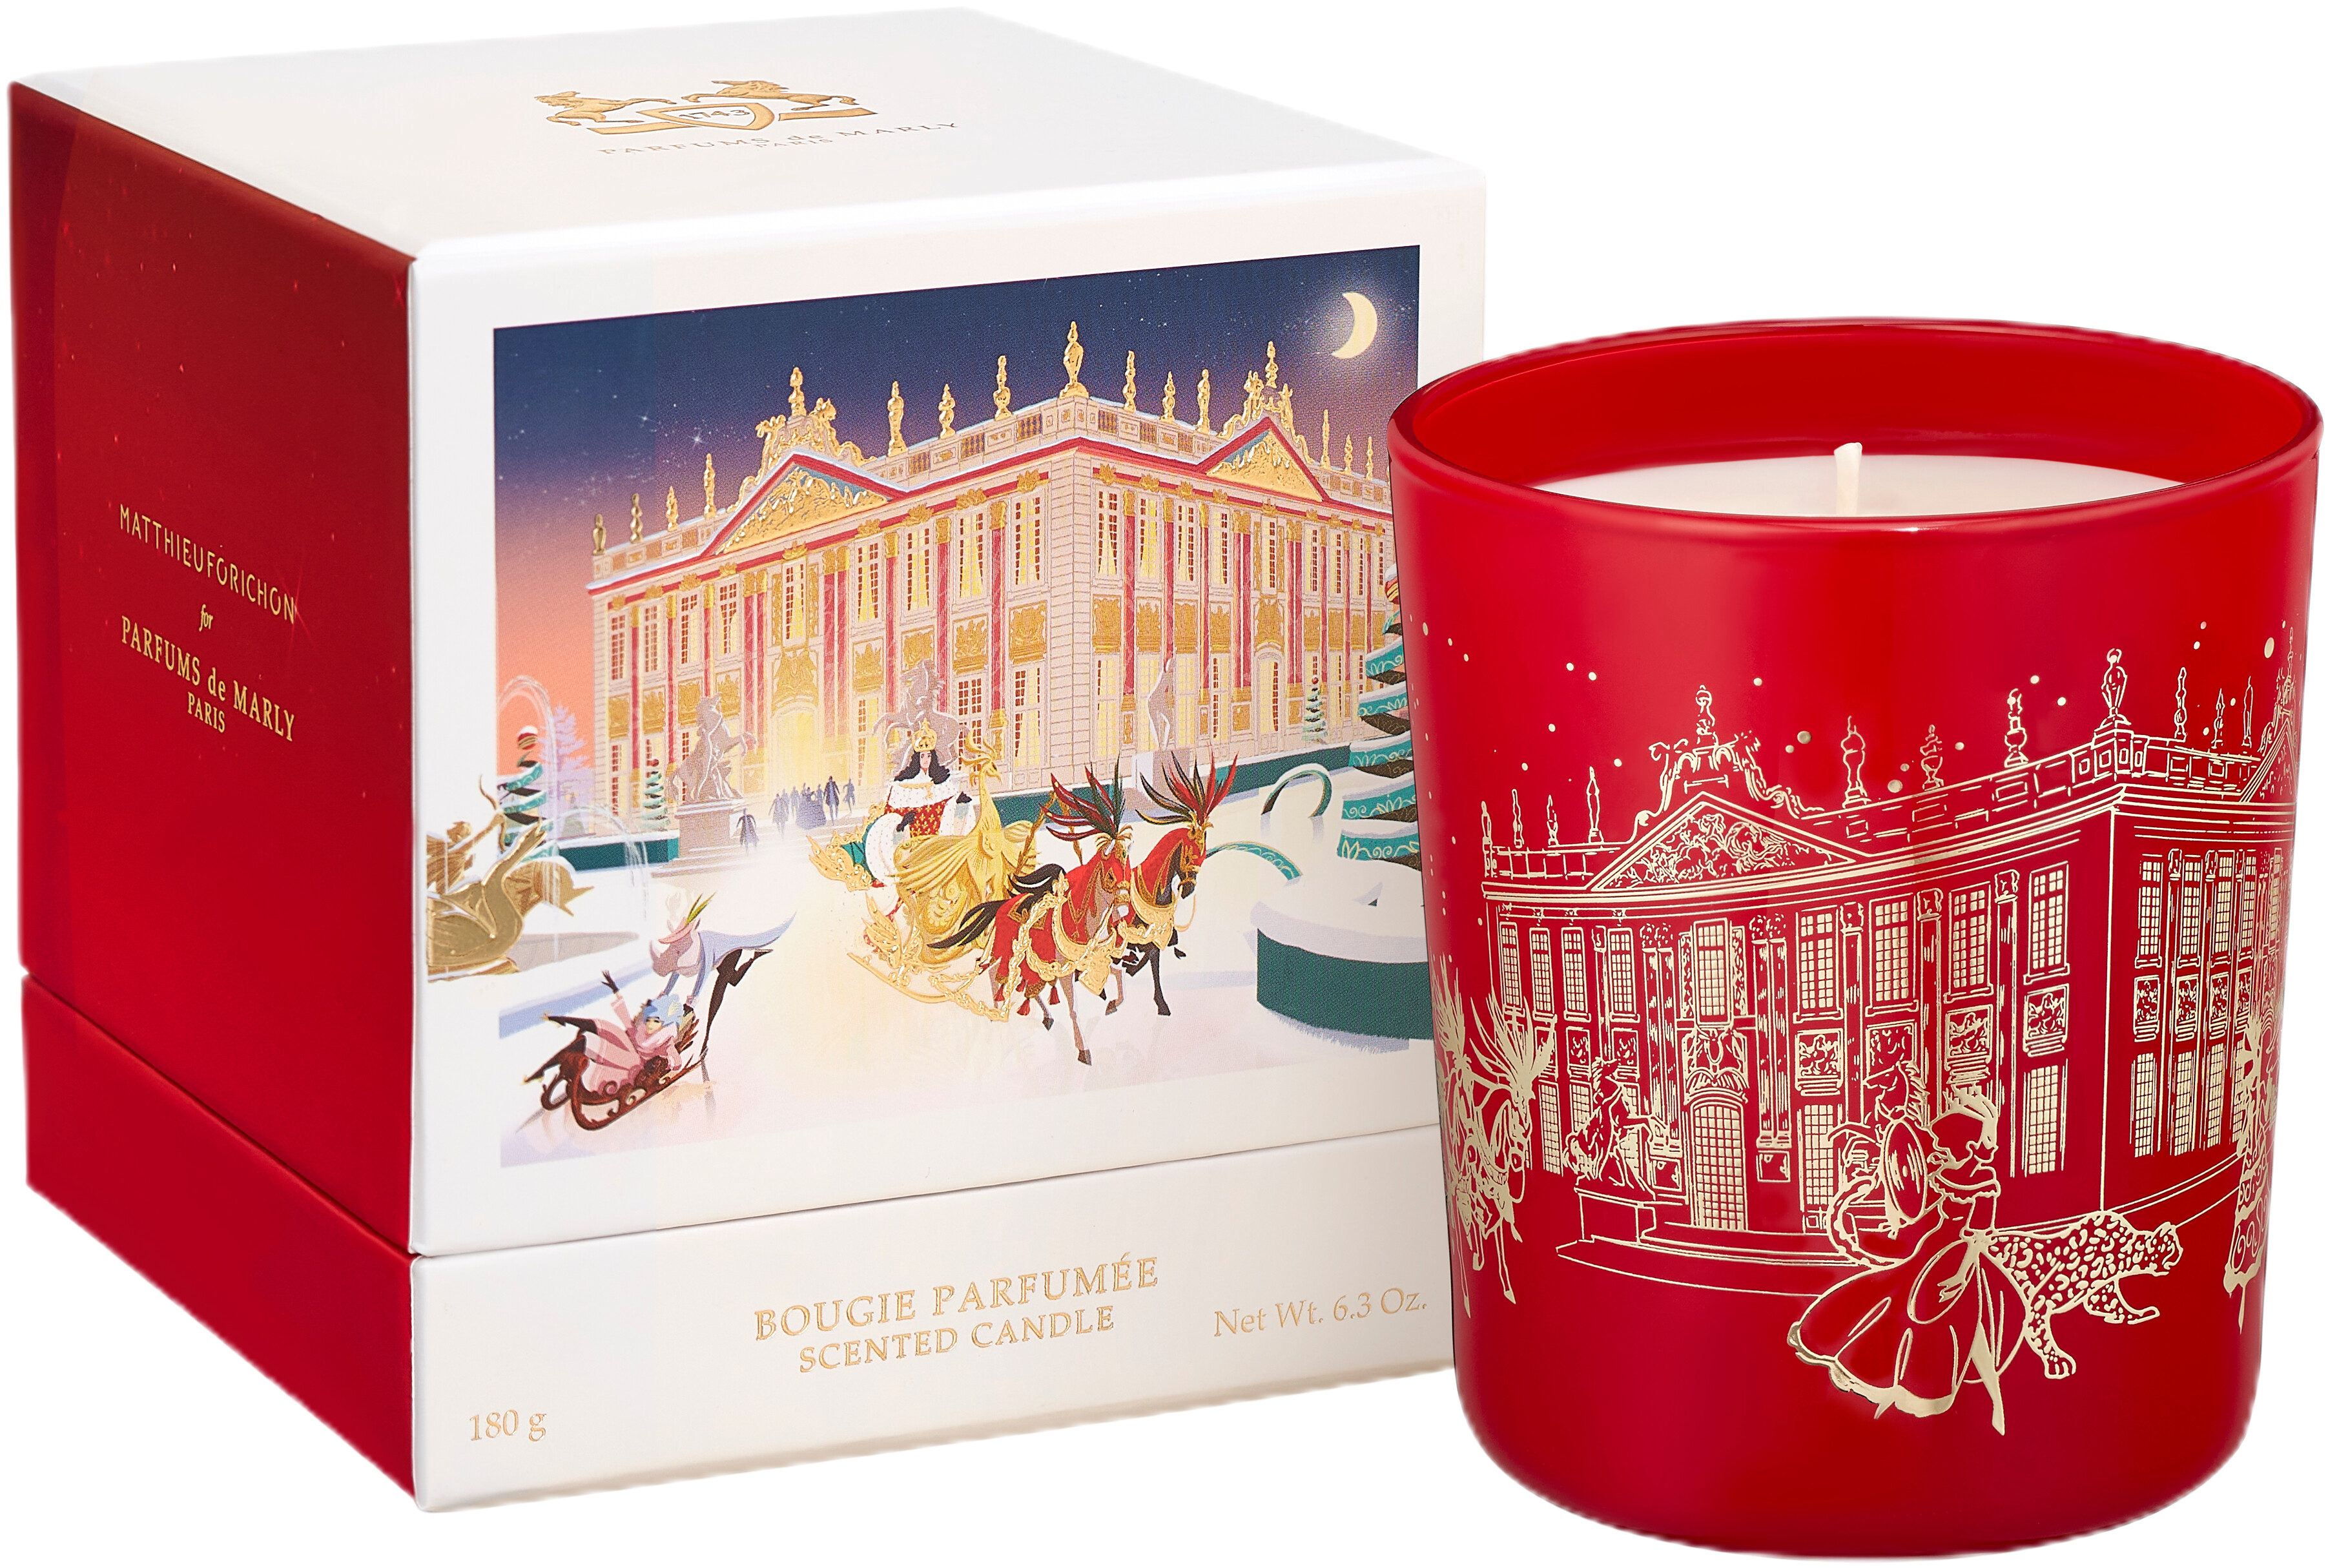 Parfums de Marly Delice d'Epices Candle 180g Red